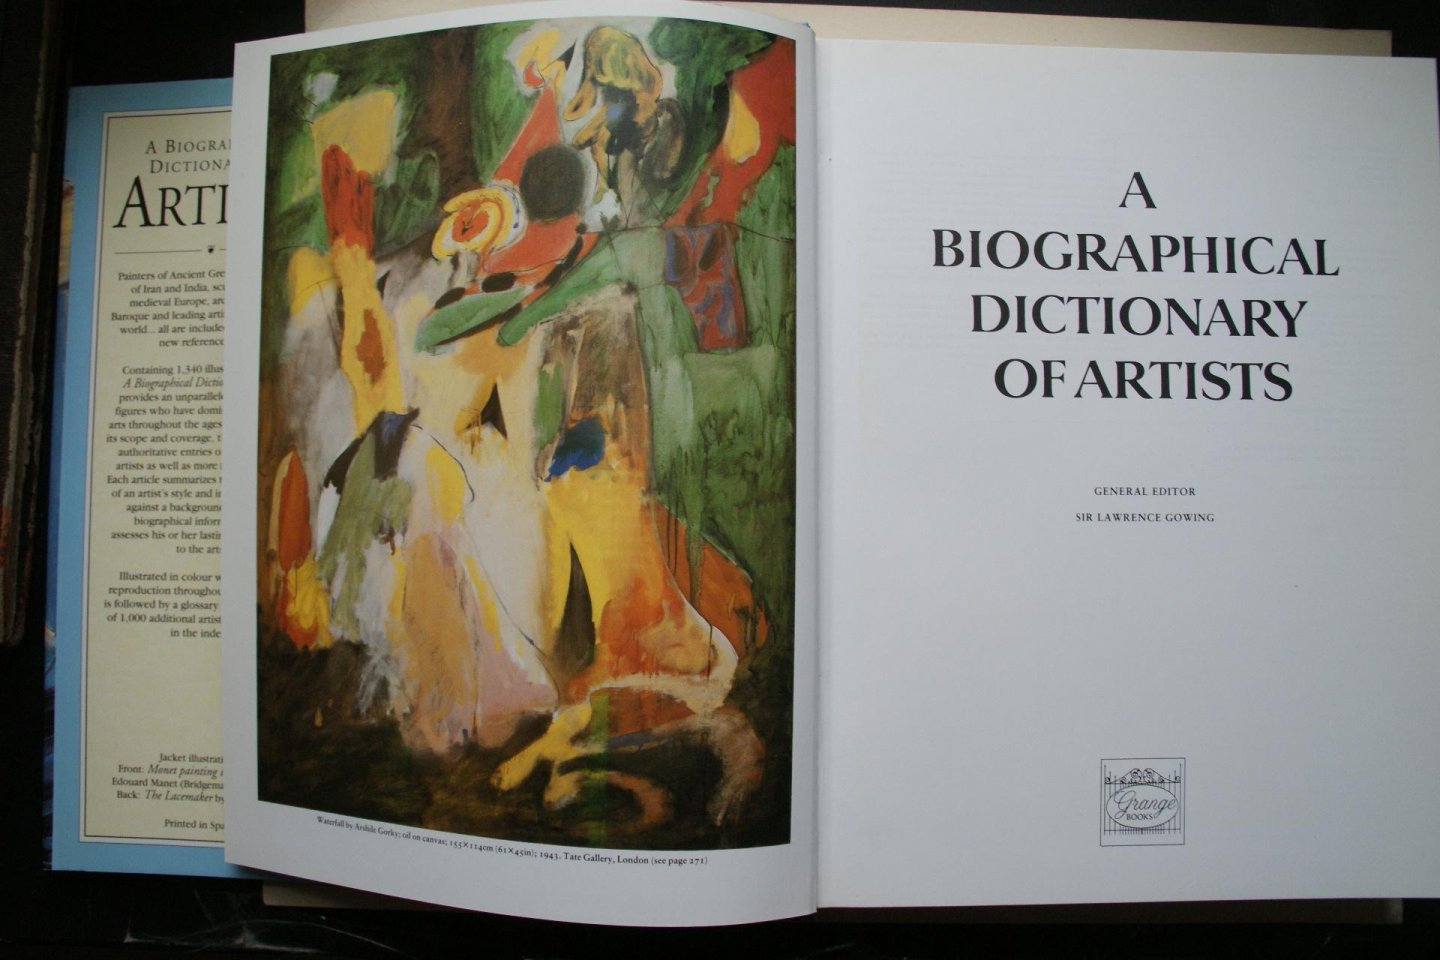 Gowing, Sir Lawrence - A Biographical Dictionary of Artists